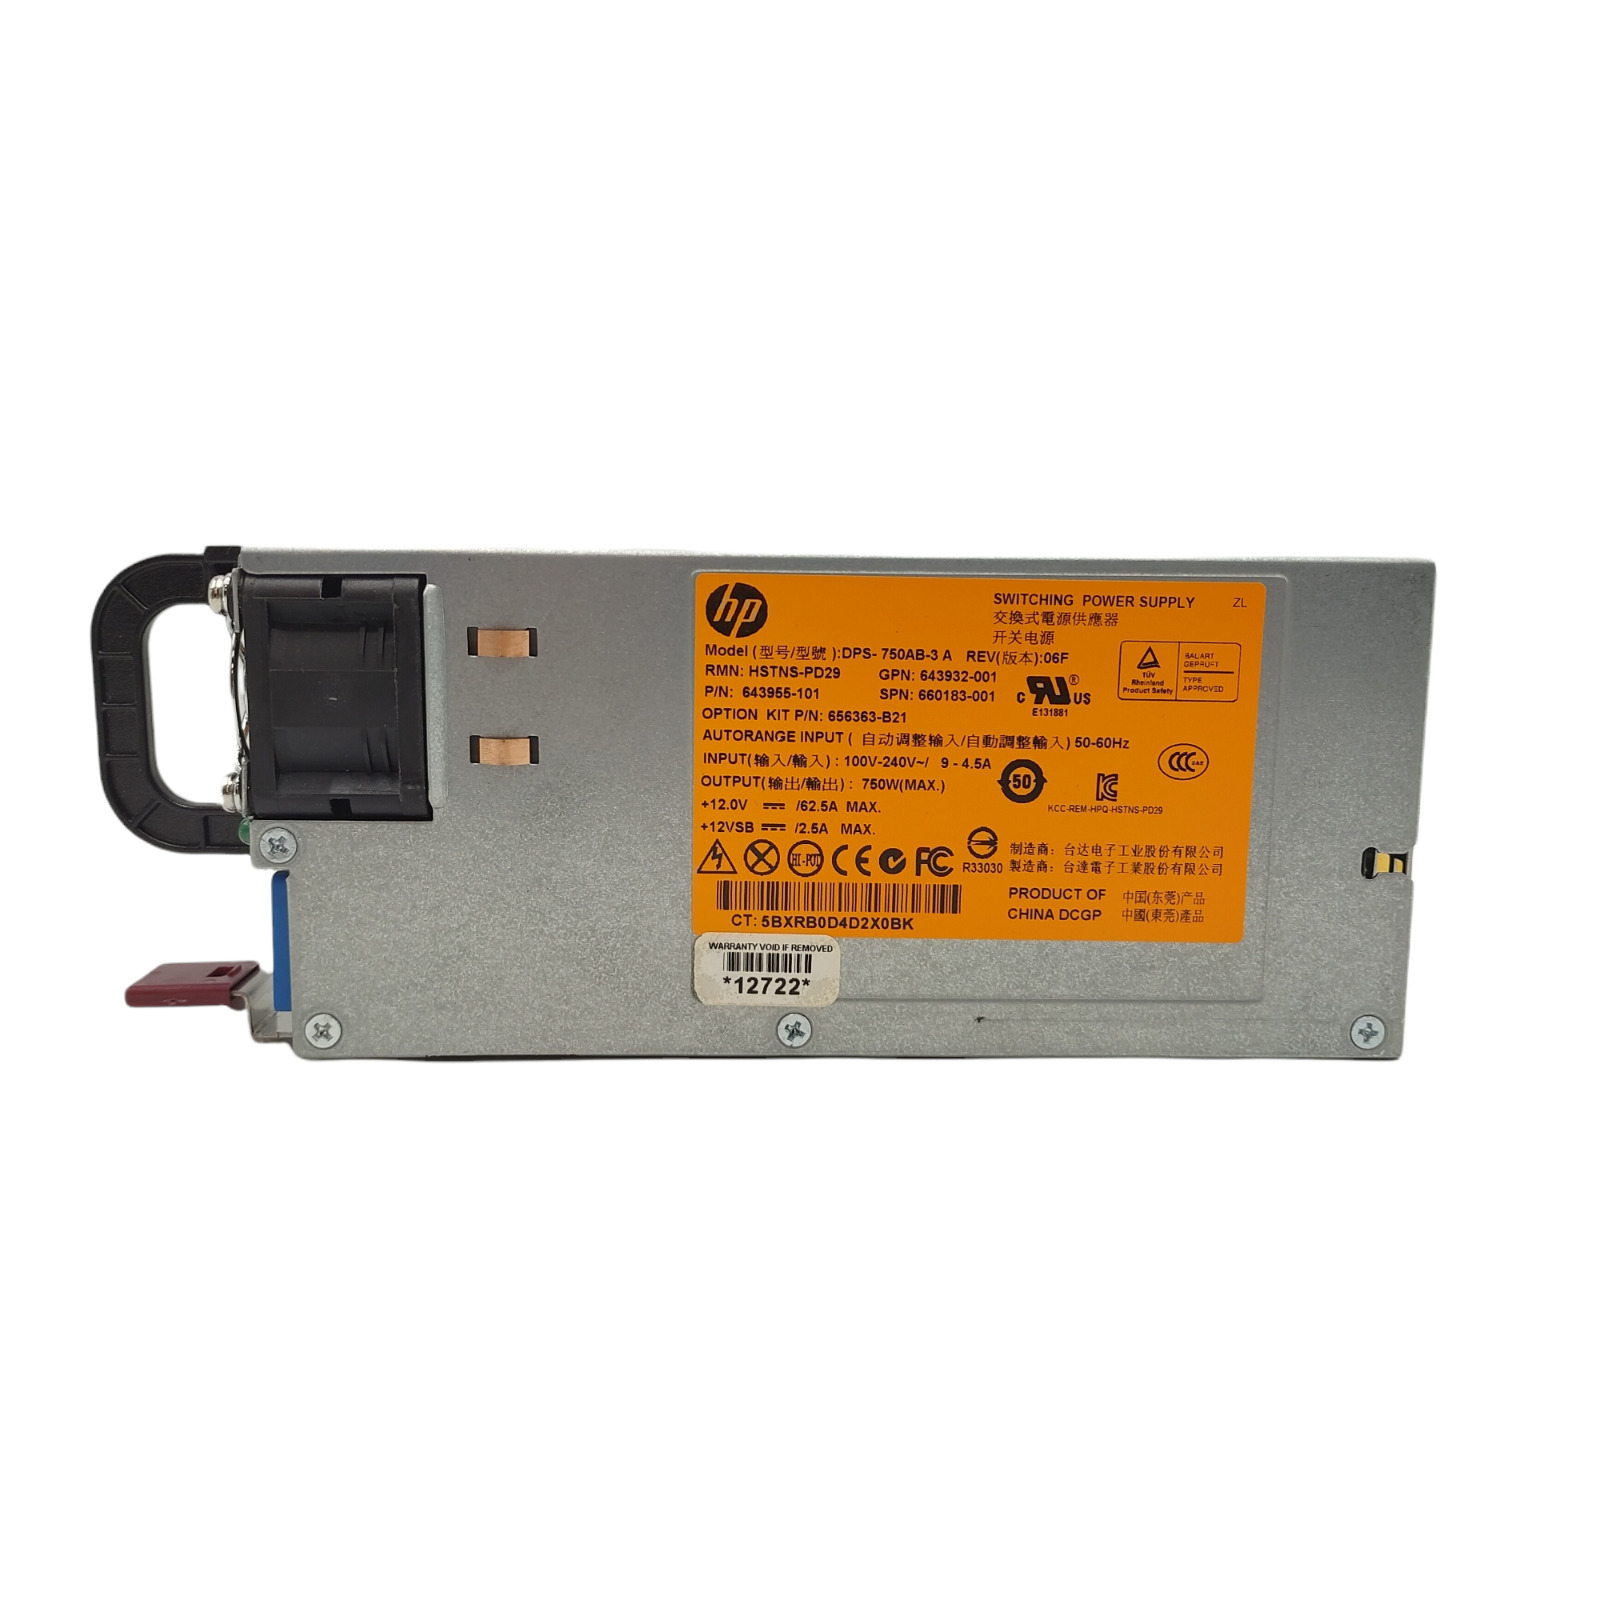 HP 750W DPS-750AB-3A HSTNS-PD29 660183-001 643955-101 643932-001 Power Supply